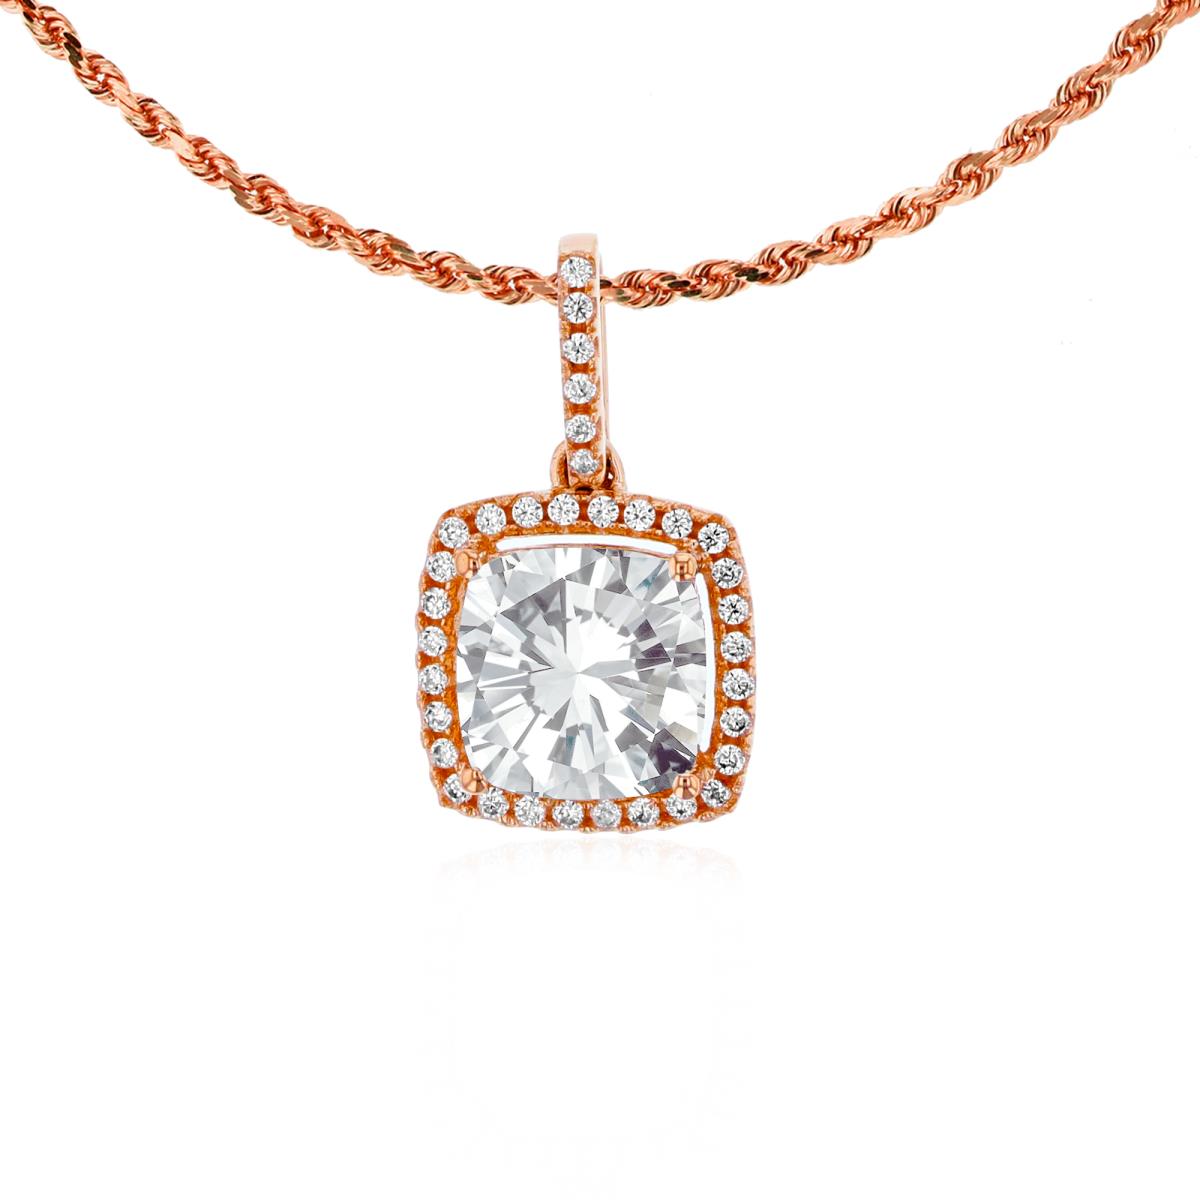 14K Rose Gold 7mm Cushion White Topaz & 0.14 CTTW Rnd Diamond Halo 18" Rope Chain Necklace